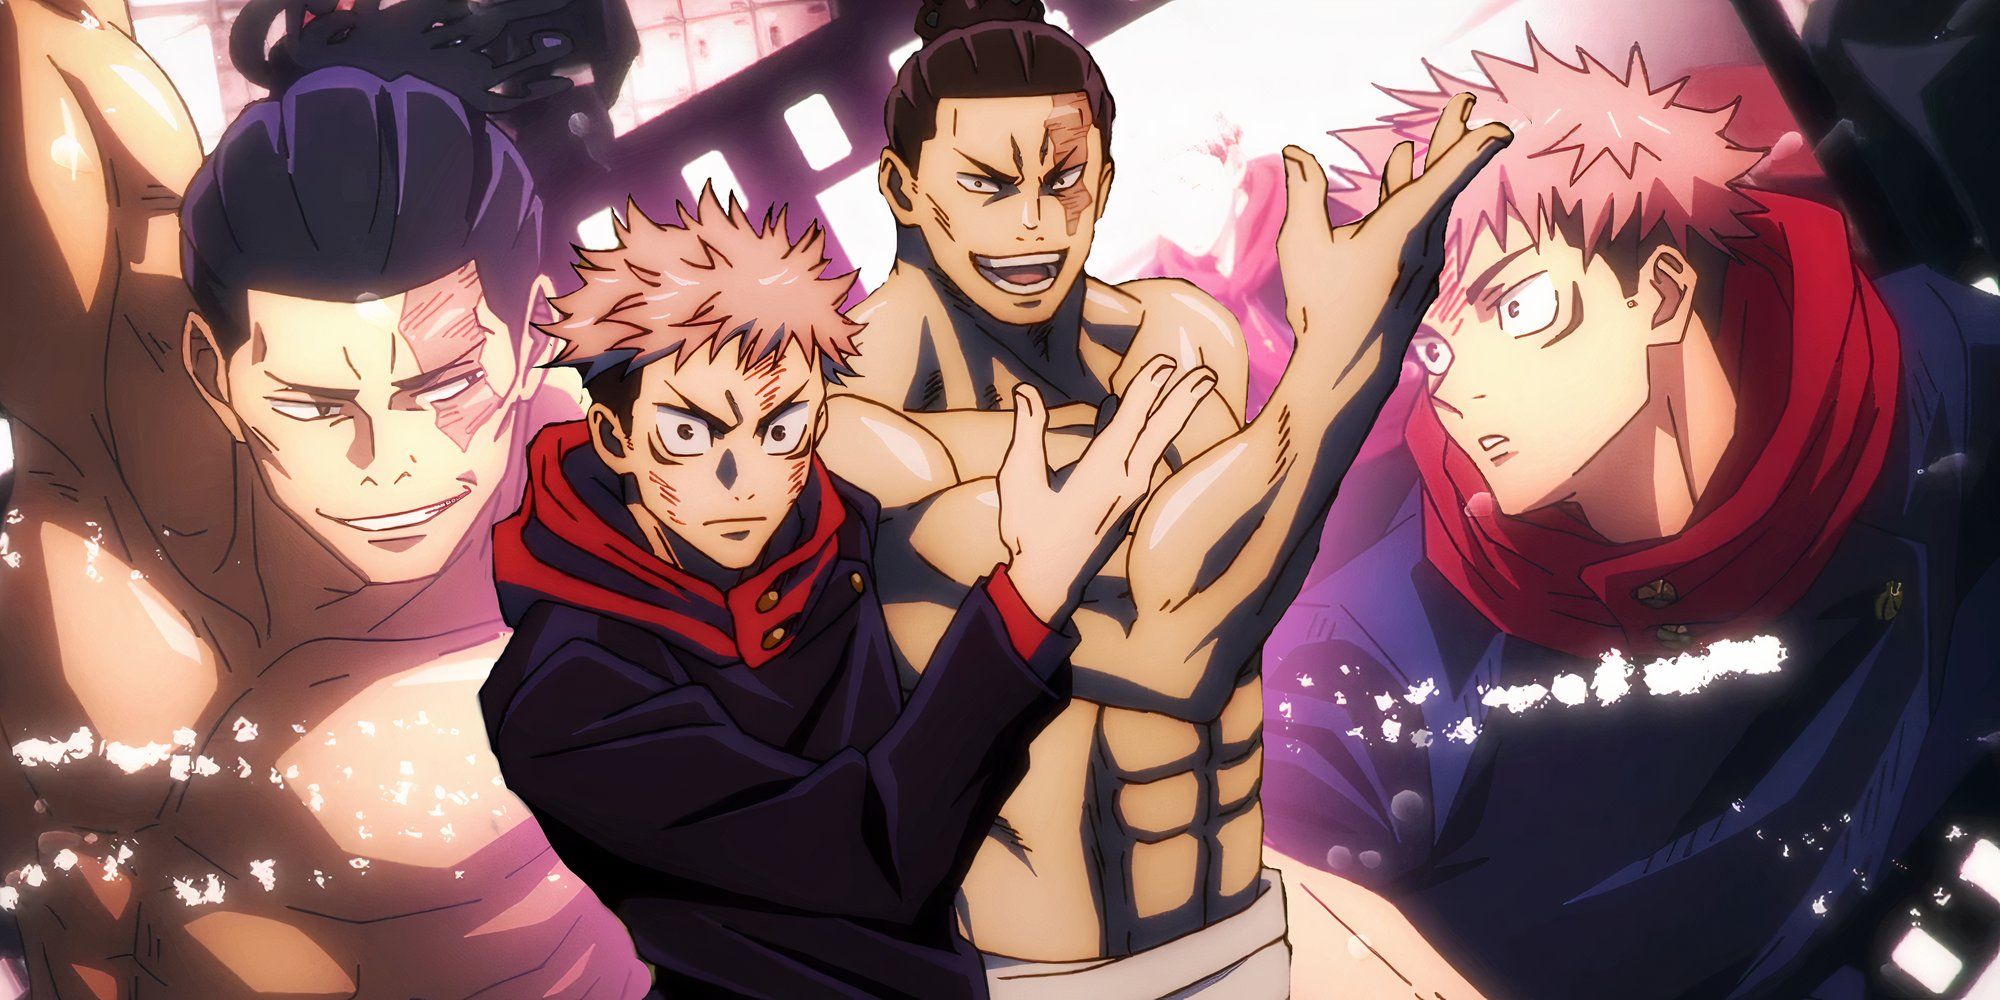 Yuji and todo in jujutsu kaisen standing back to back with one hand raised each and with yuji and choso mid fight in the background as seen in the anime